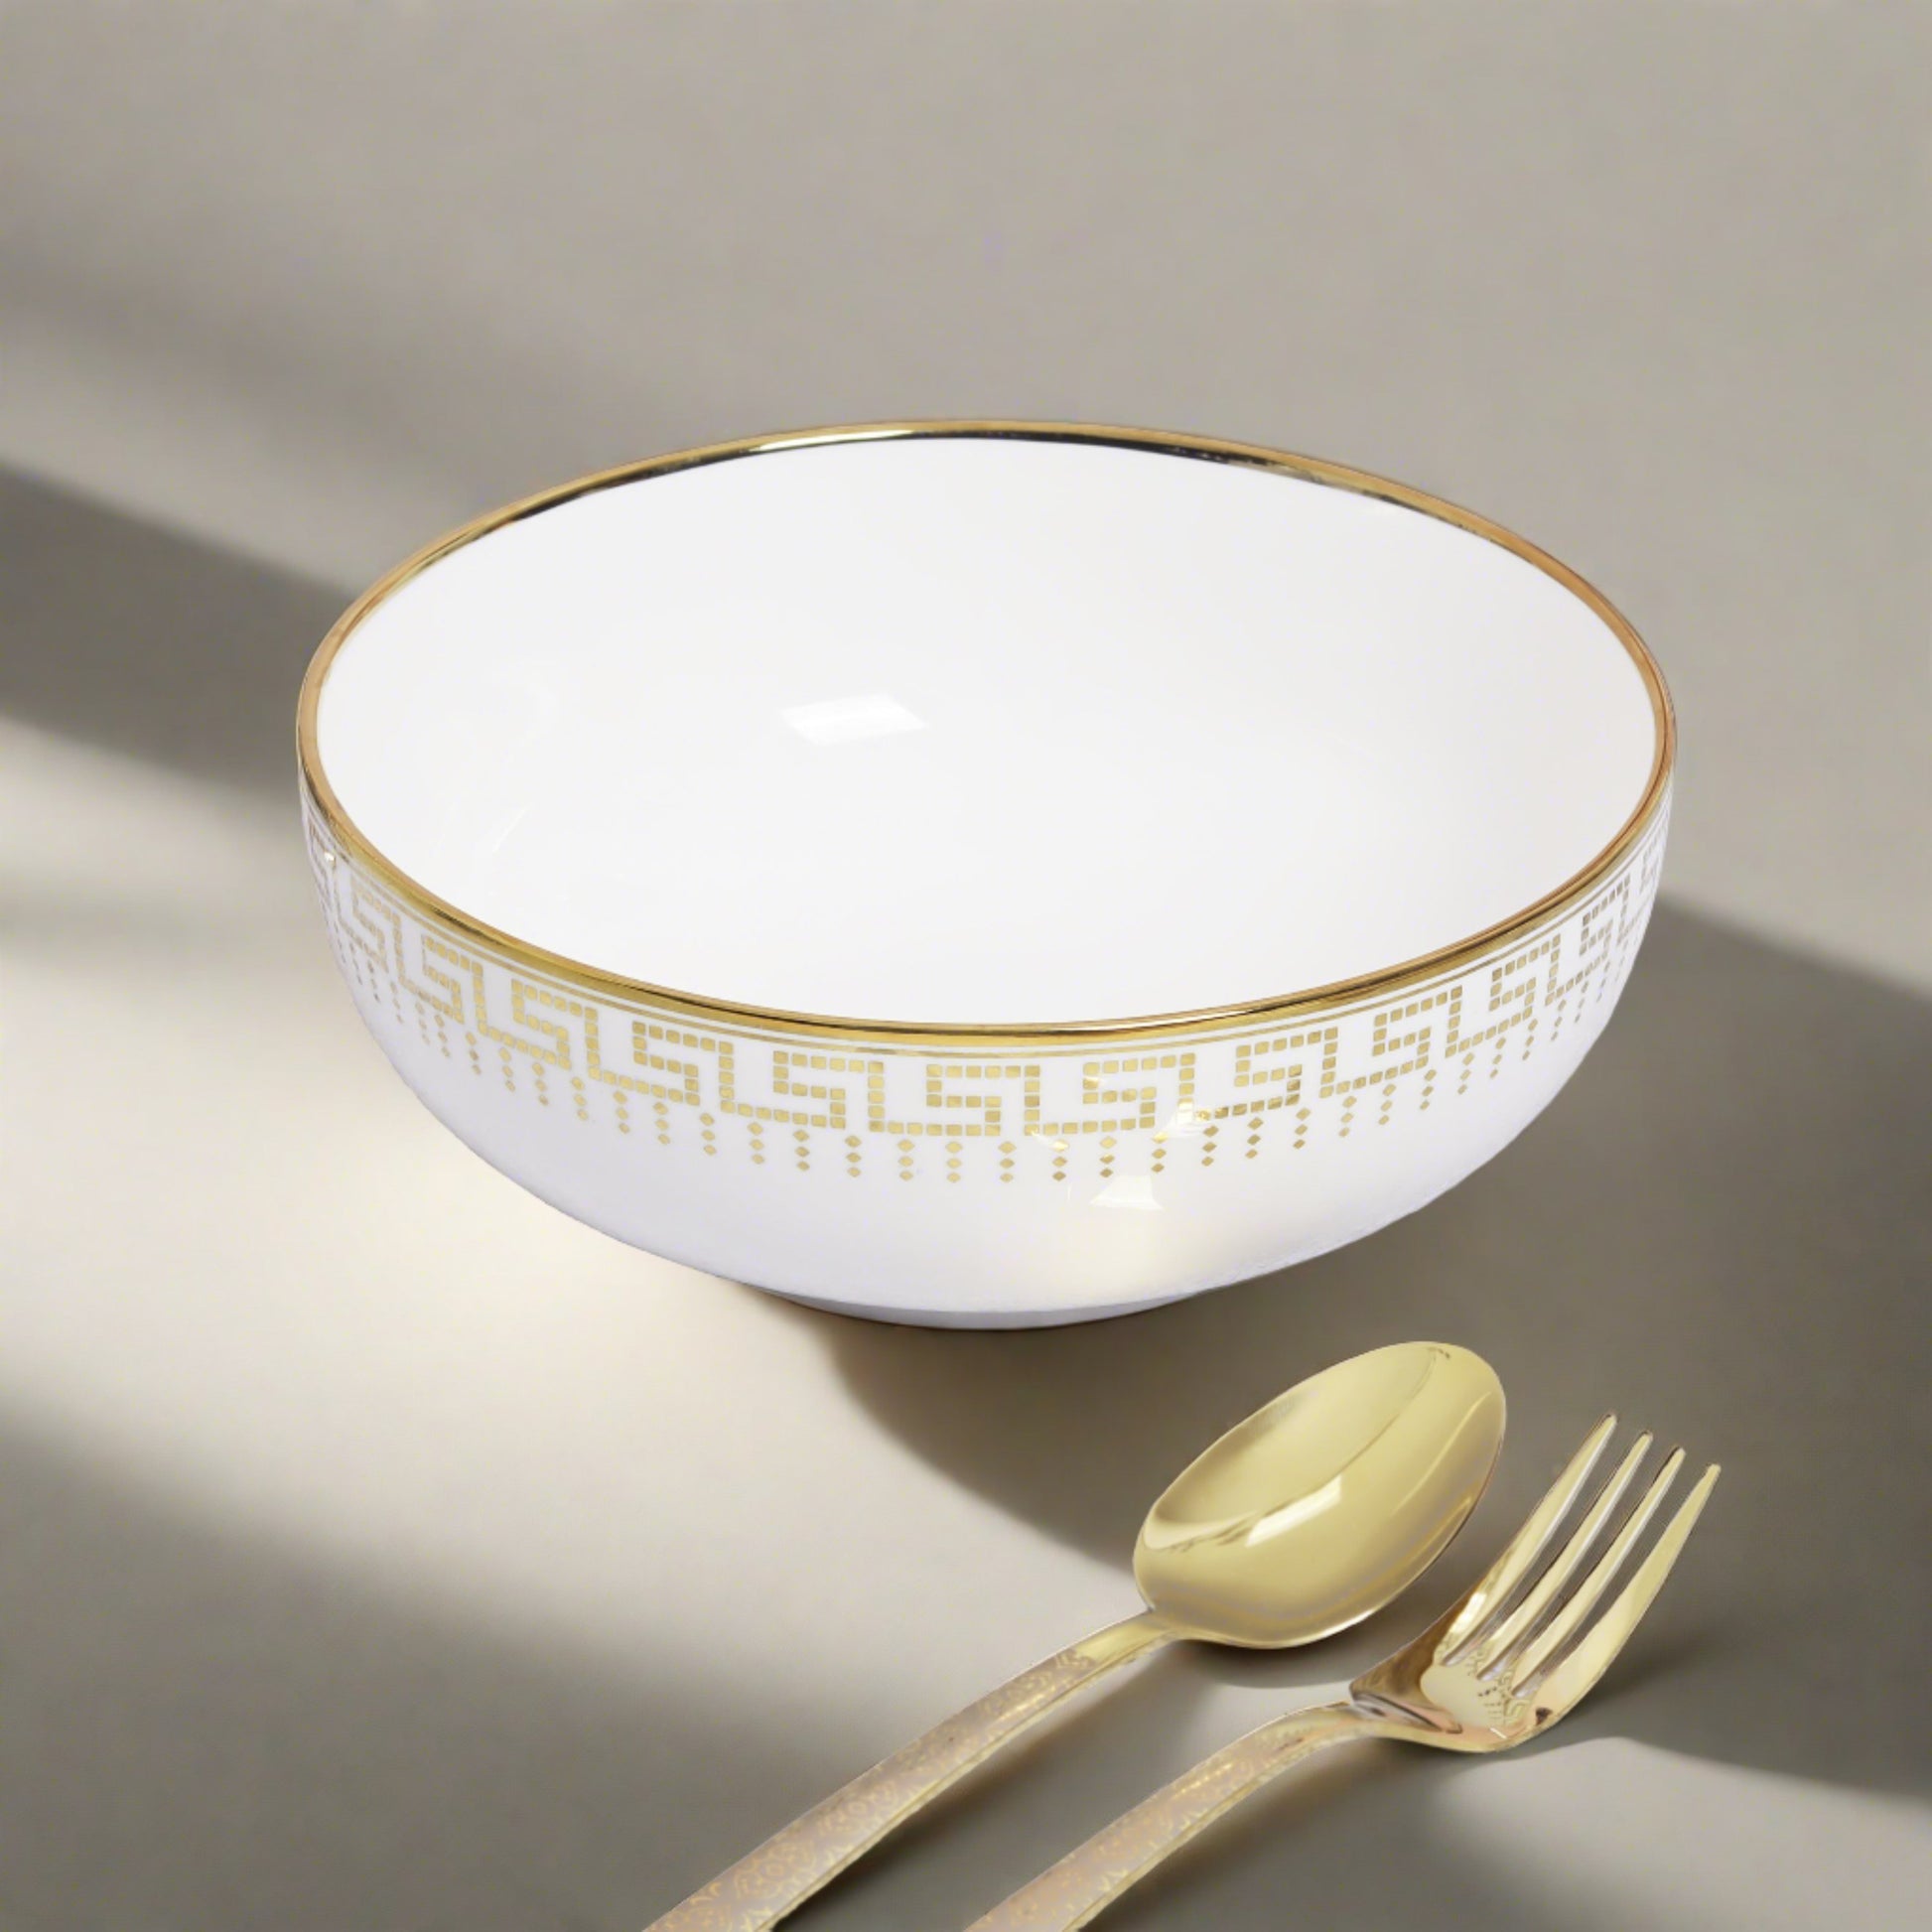 Complete fine bone china pasta bowl set - perfect for serving and enjoying pasta dishes.